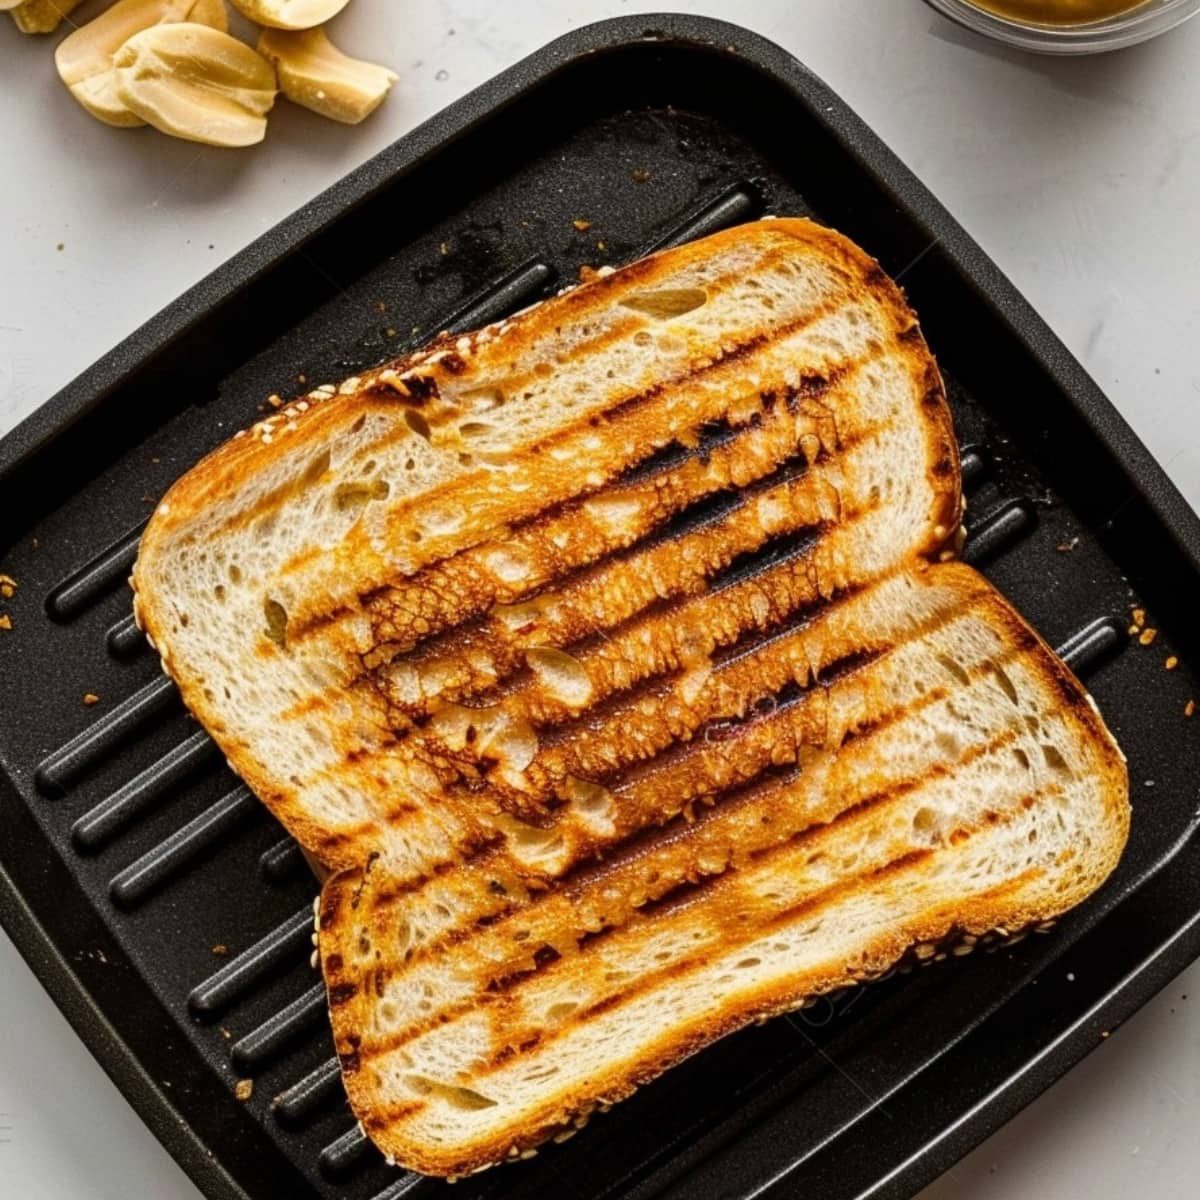 Sandwich grilled in a griddle plate.